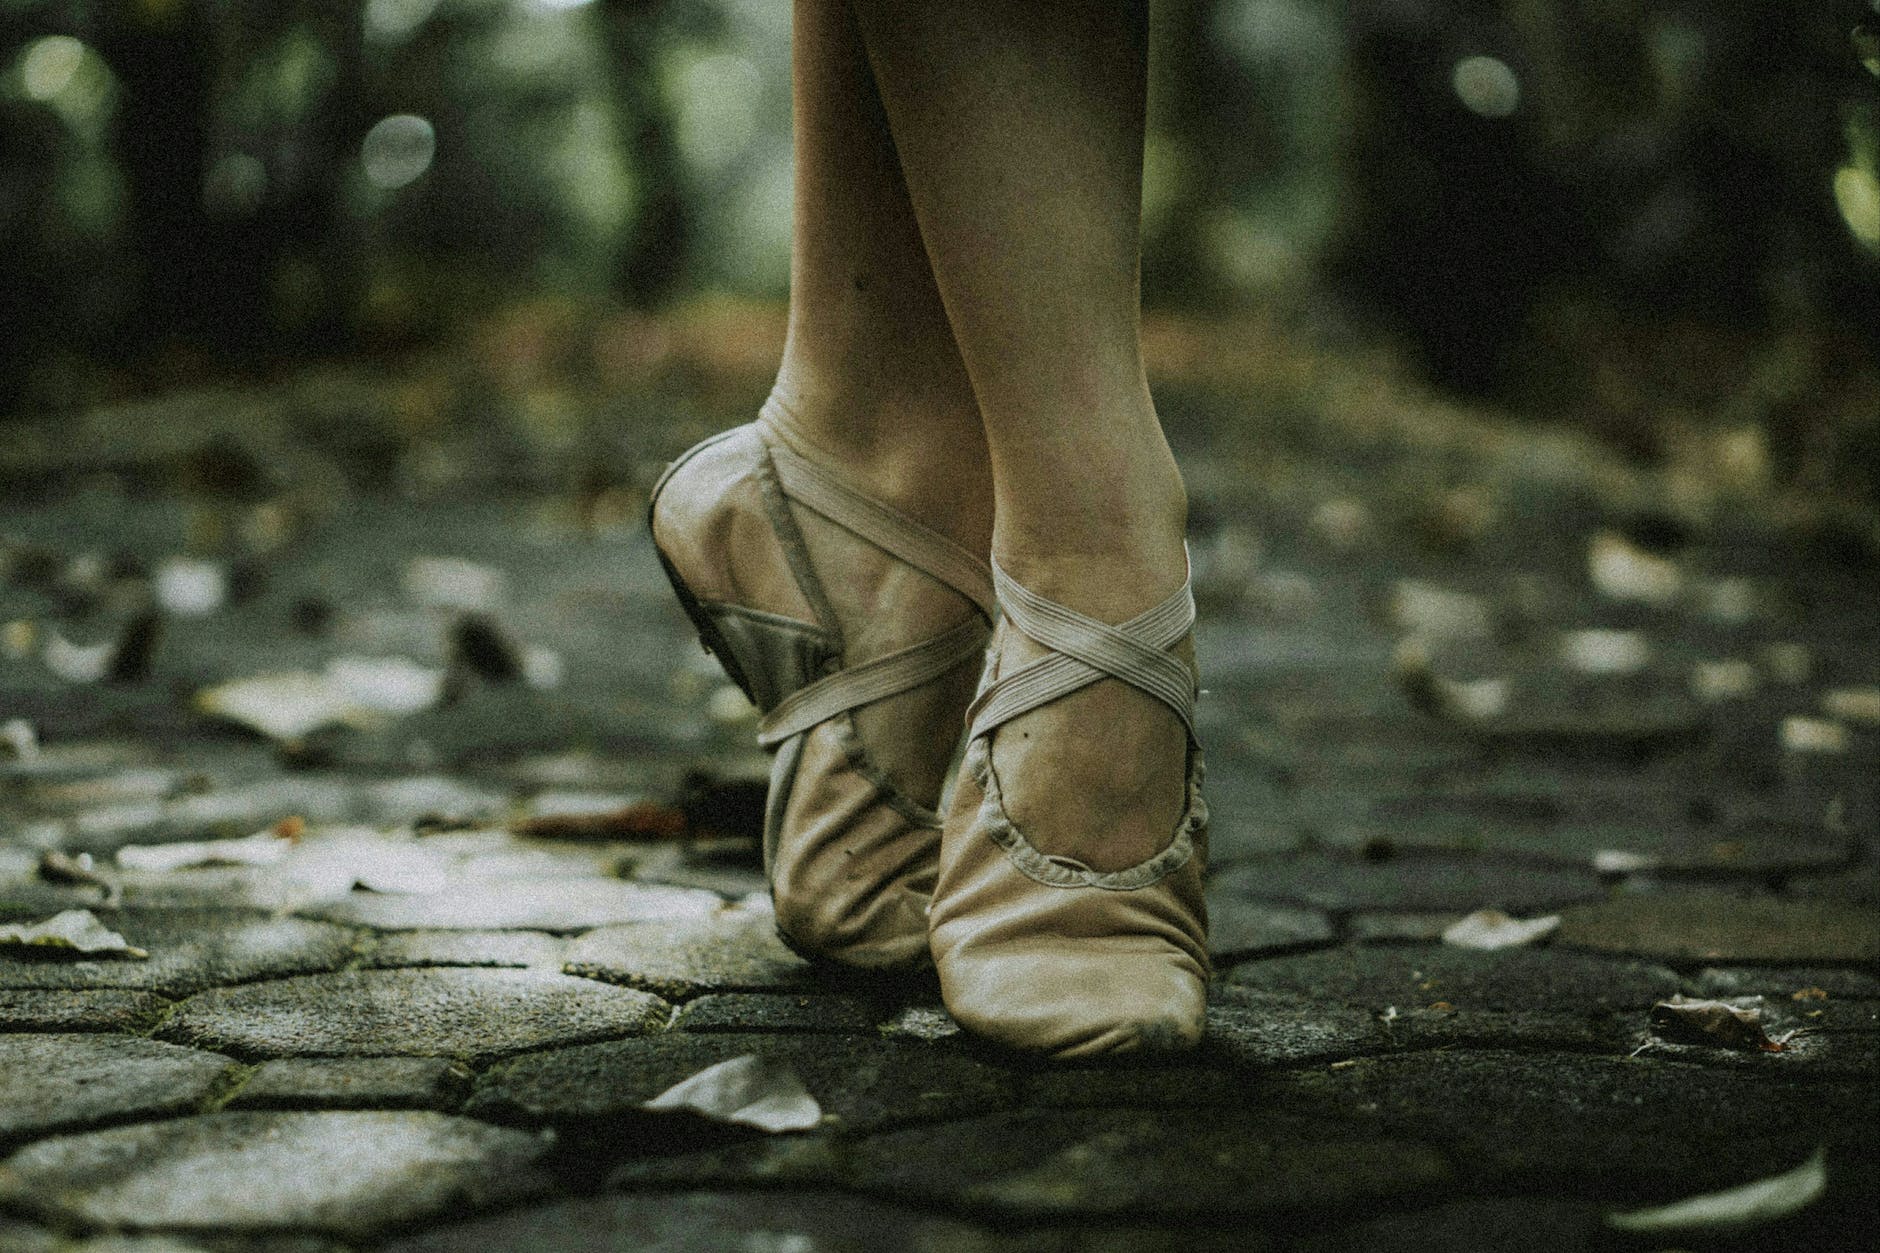 person wearing ballet shoes